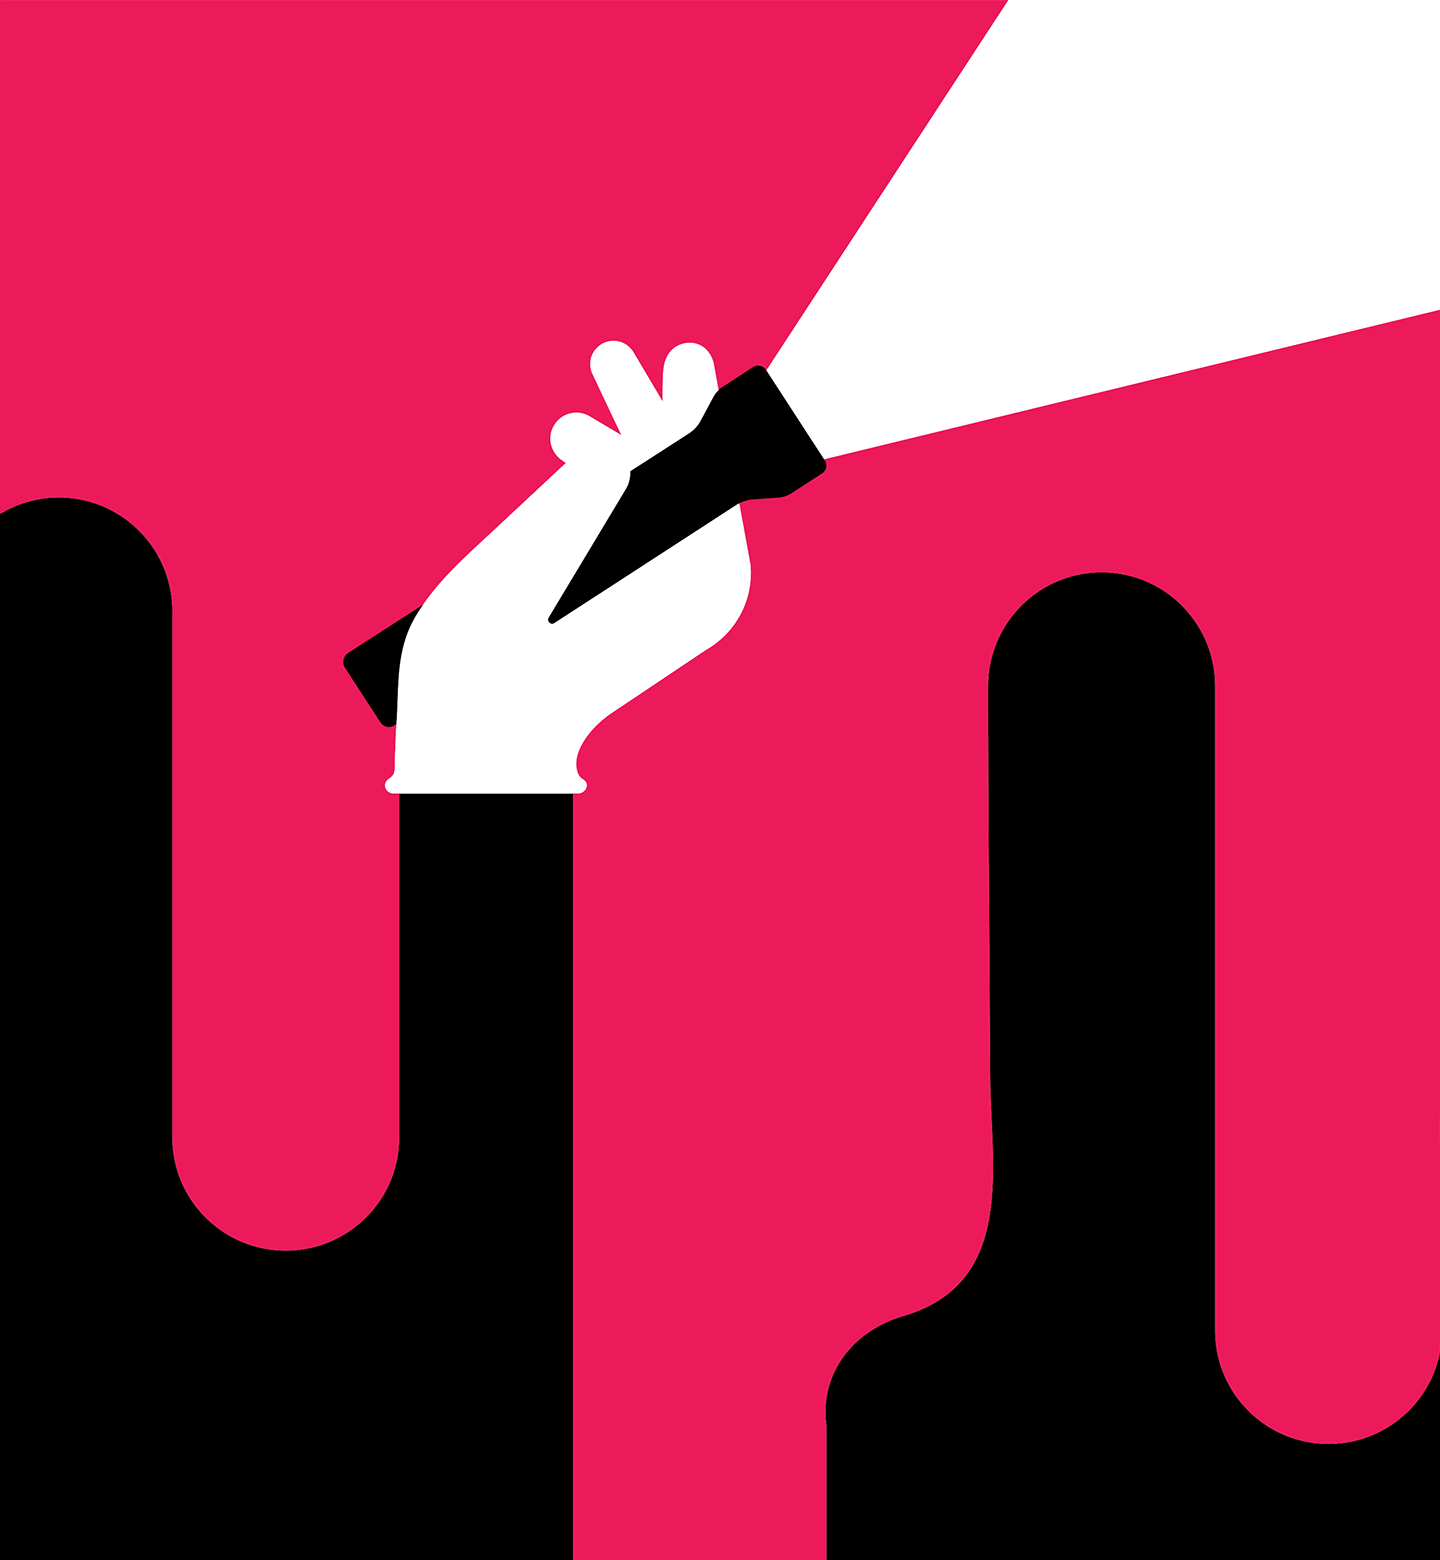 An illustration of a hand with a flashlight on a red and black background